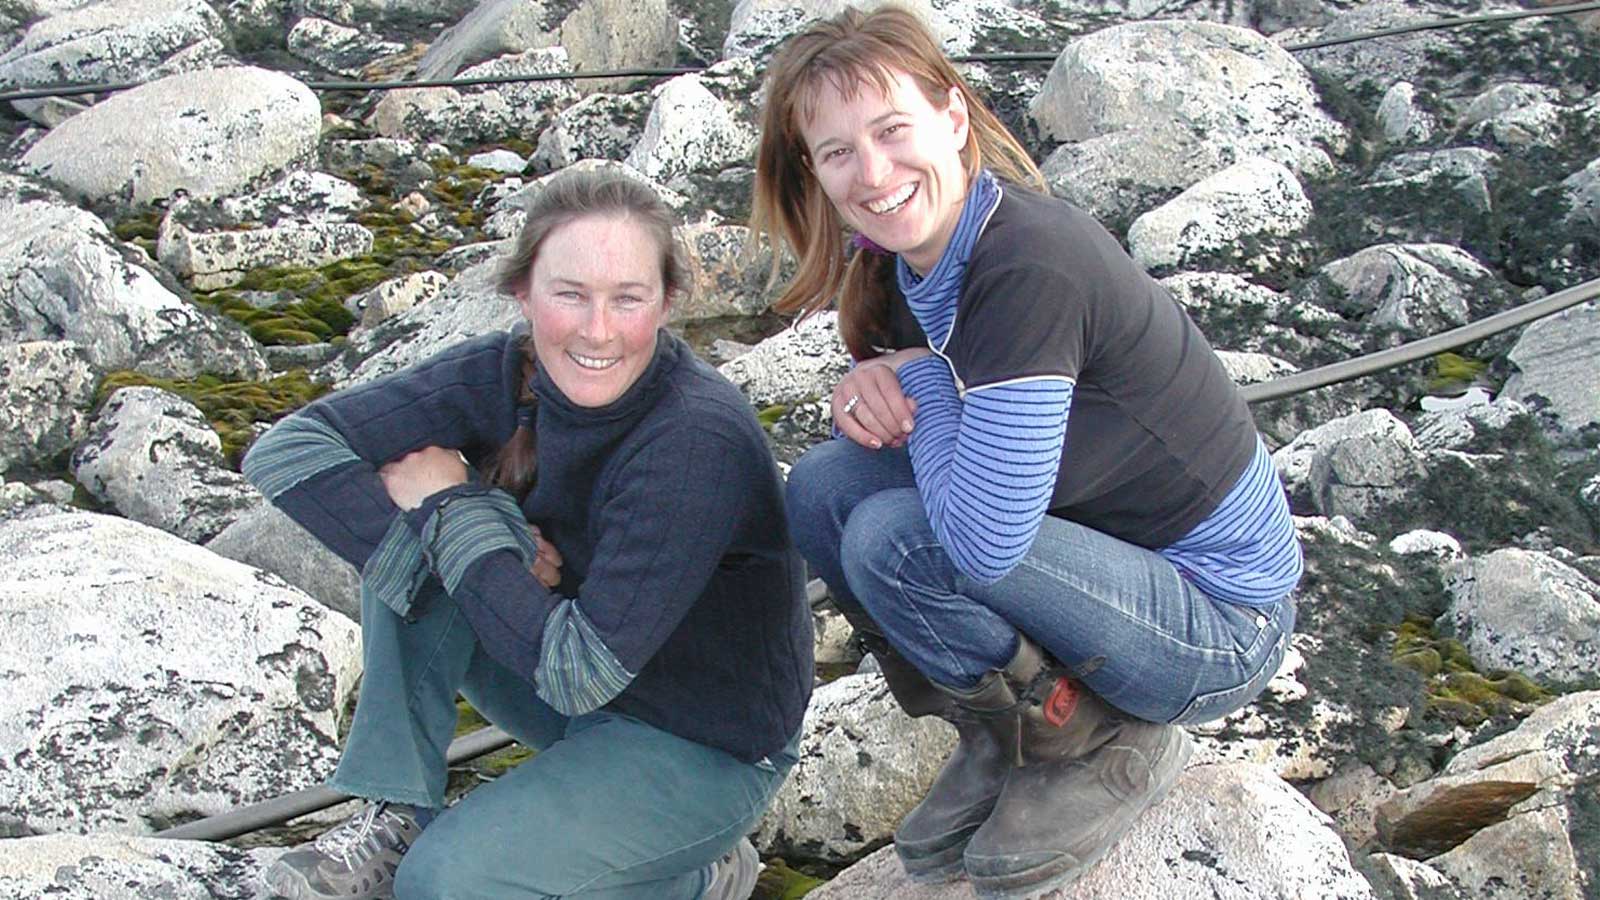 Two women are sitting on rocks in Antarctica. They are wearing long sleeve jumpers, blue jeans and hiking boots. They are squatting down smiling.